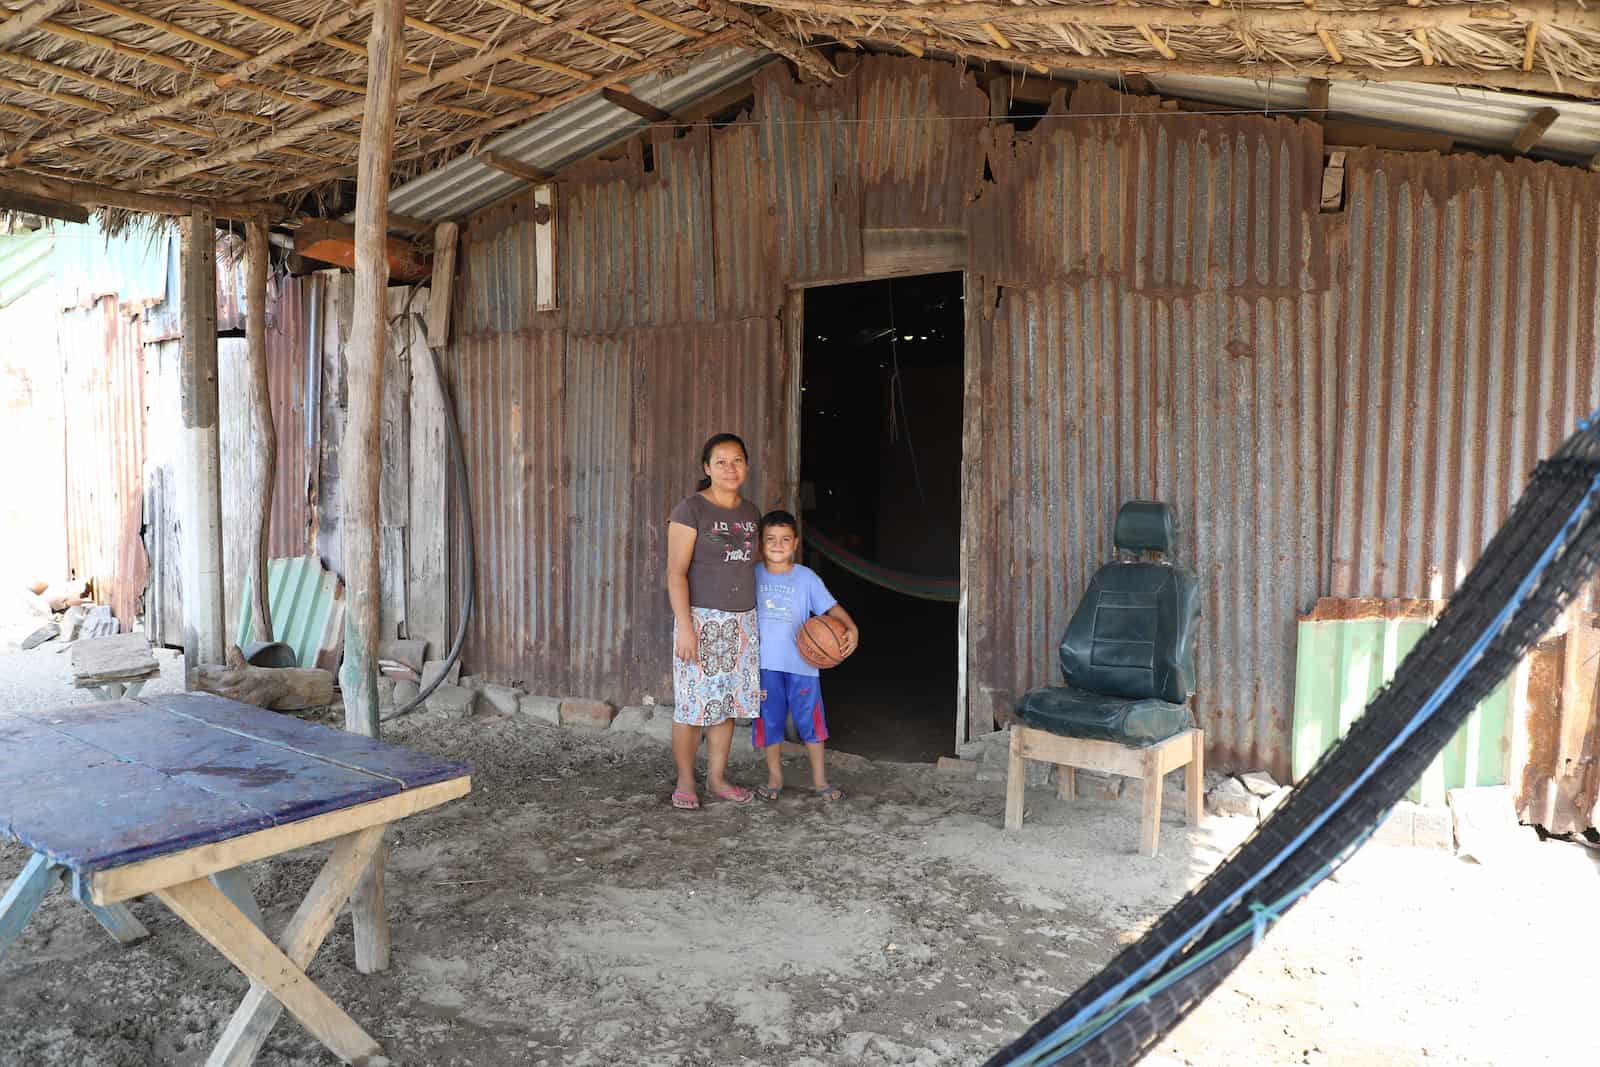 A mom and boy stand in front of a home made from corrugated metal sheets in rural El Salvador